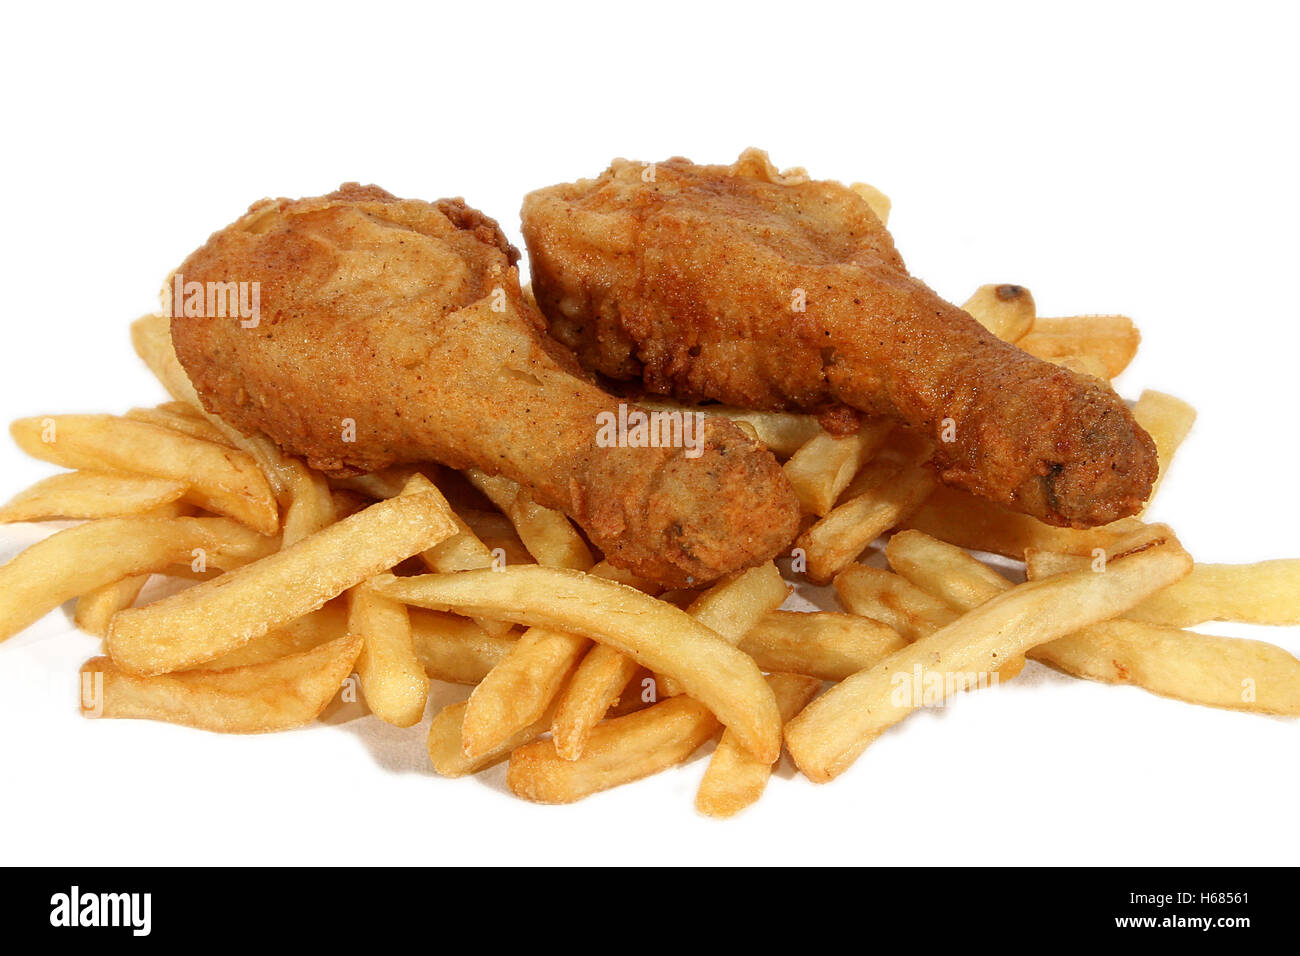 Fried Chicken / Southern Fried Chicken and Fries / Drumstick Stock Photo